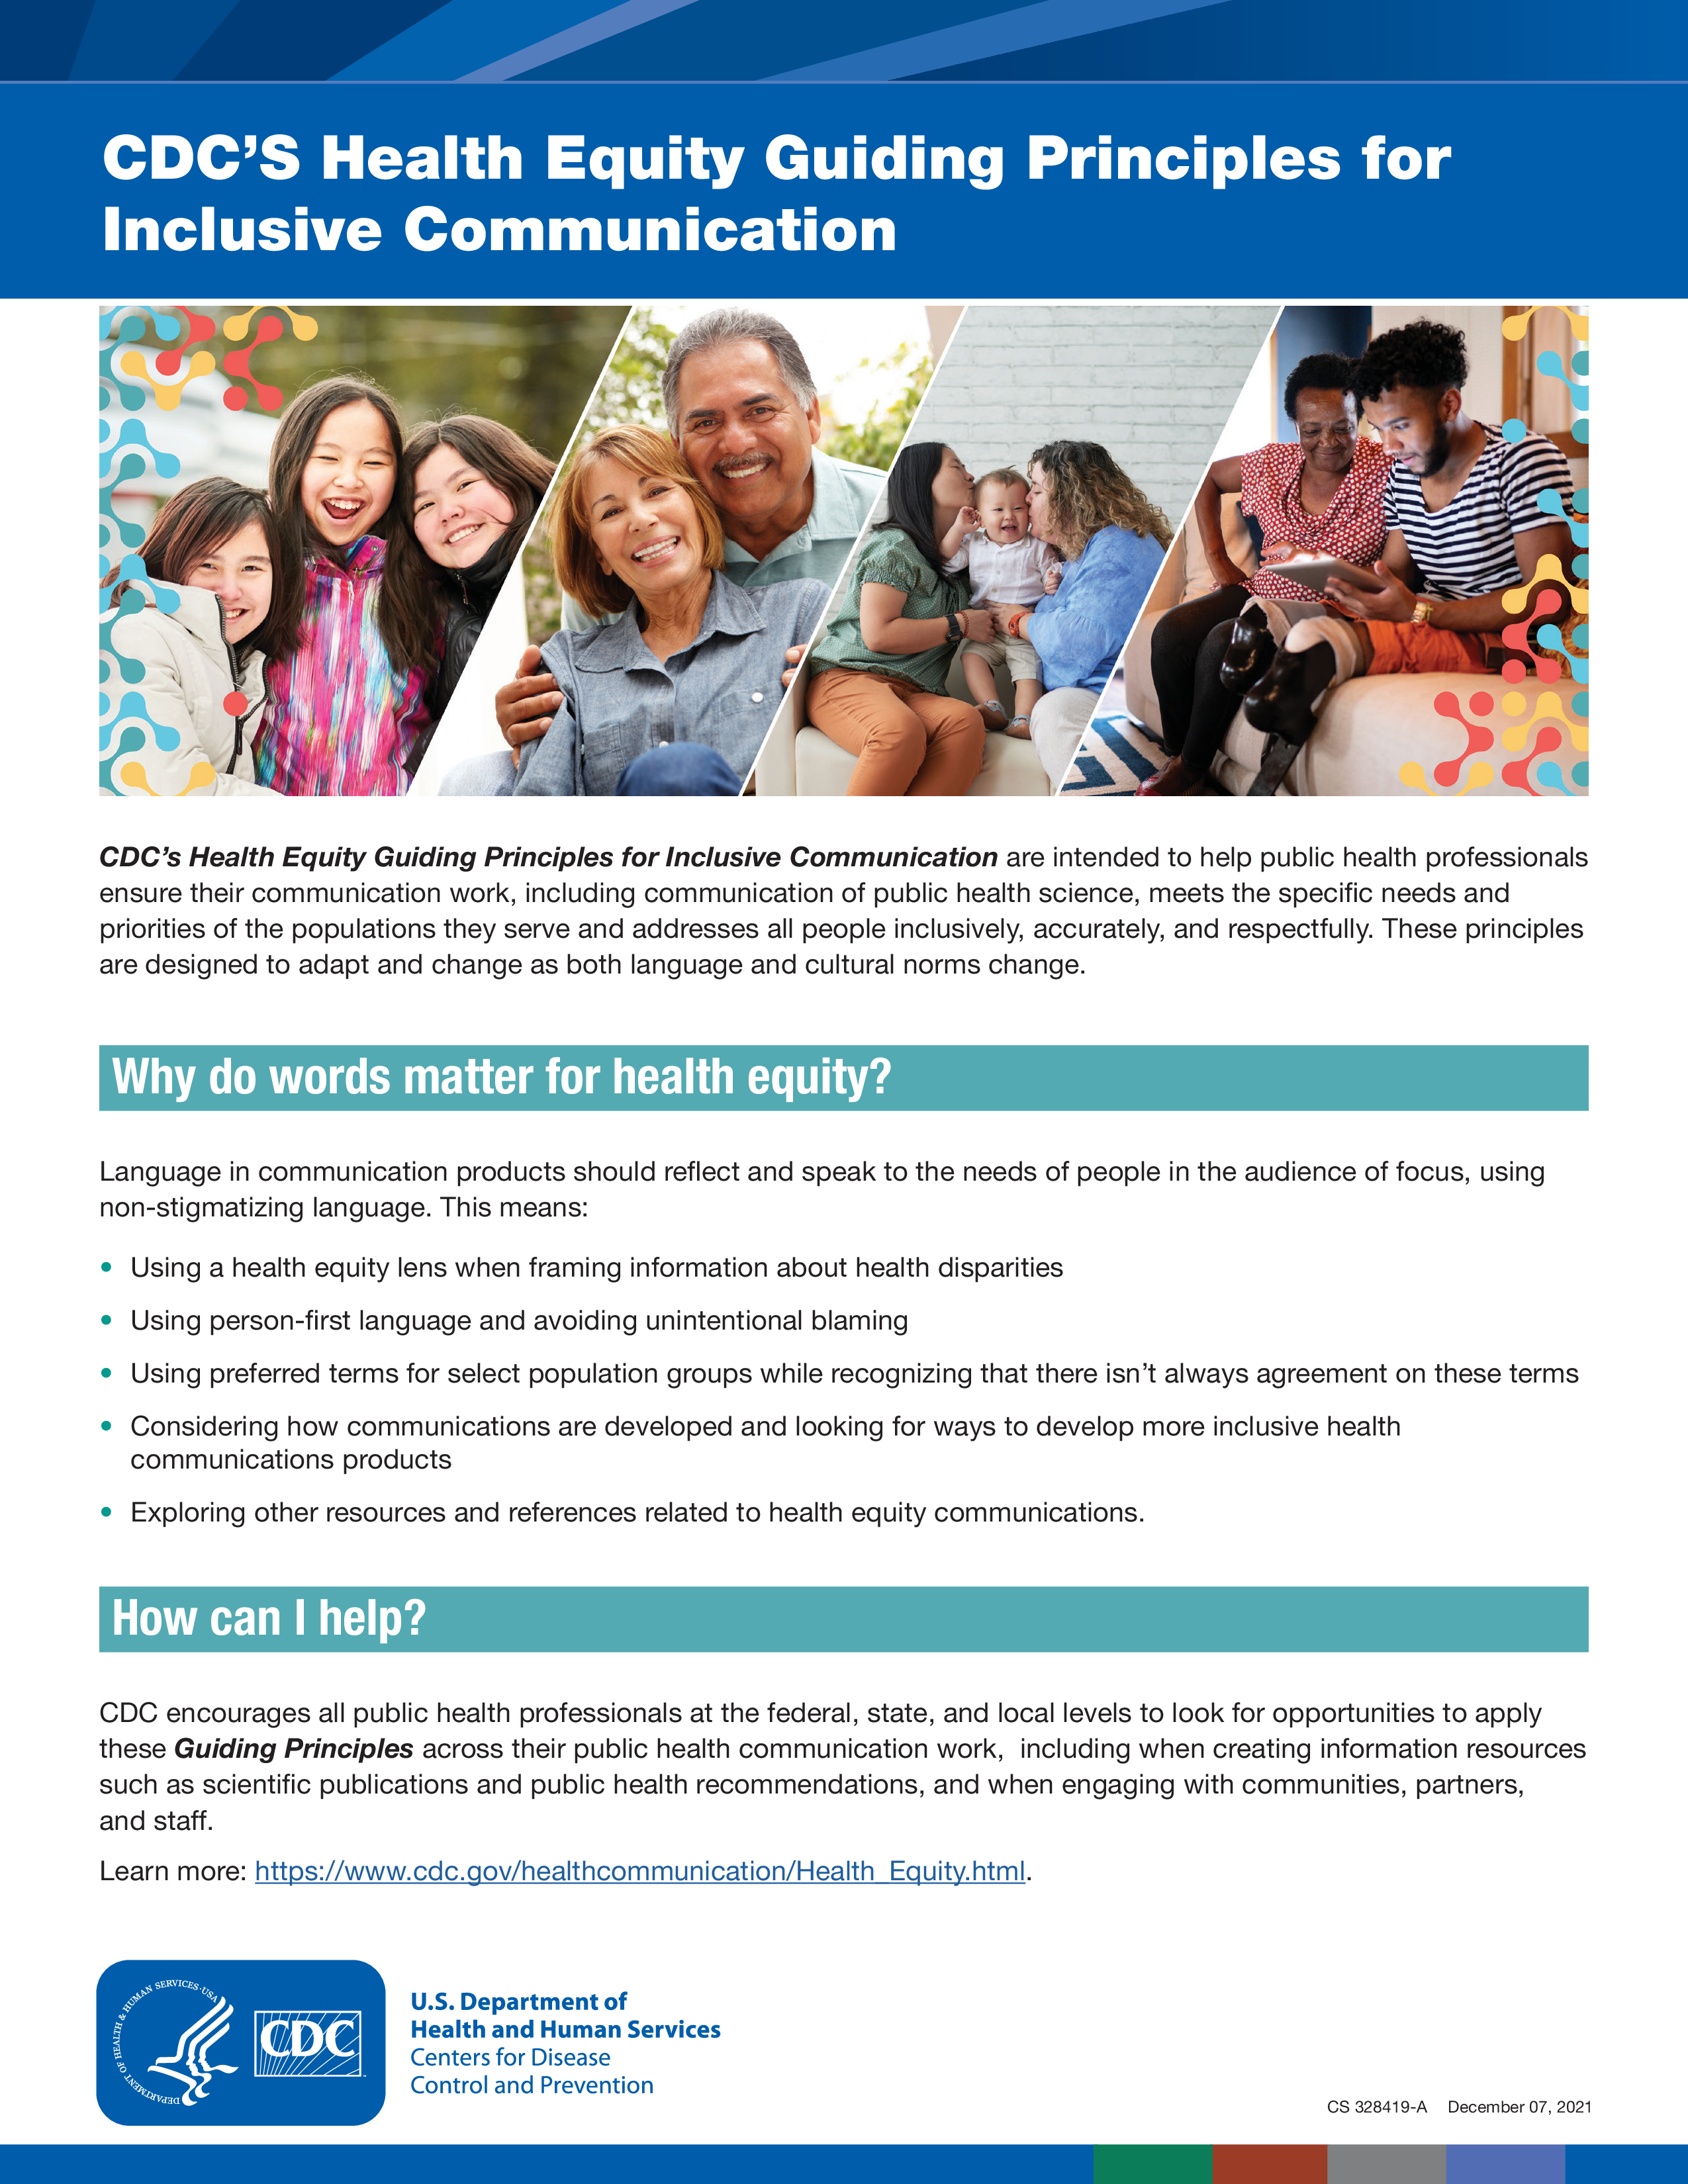 The top of the page shows four pictures side by side. The first includes 3 children smiling. The second shows a Hispanic couple. The third shows two moms kissing their baby. The fourth shows a Black mother and her teenage son. Below is text.